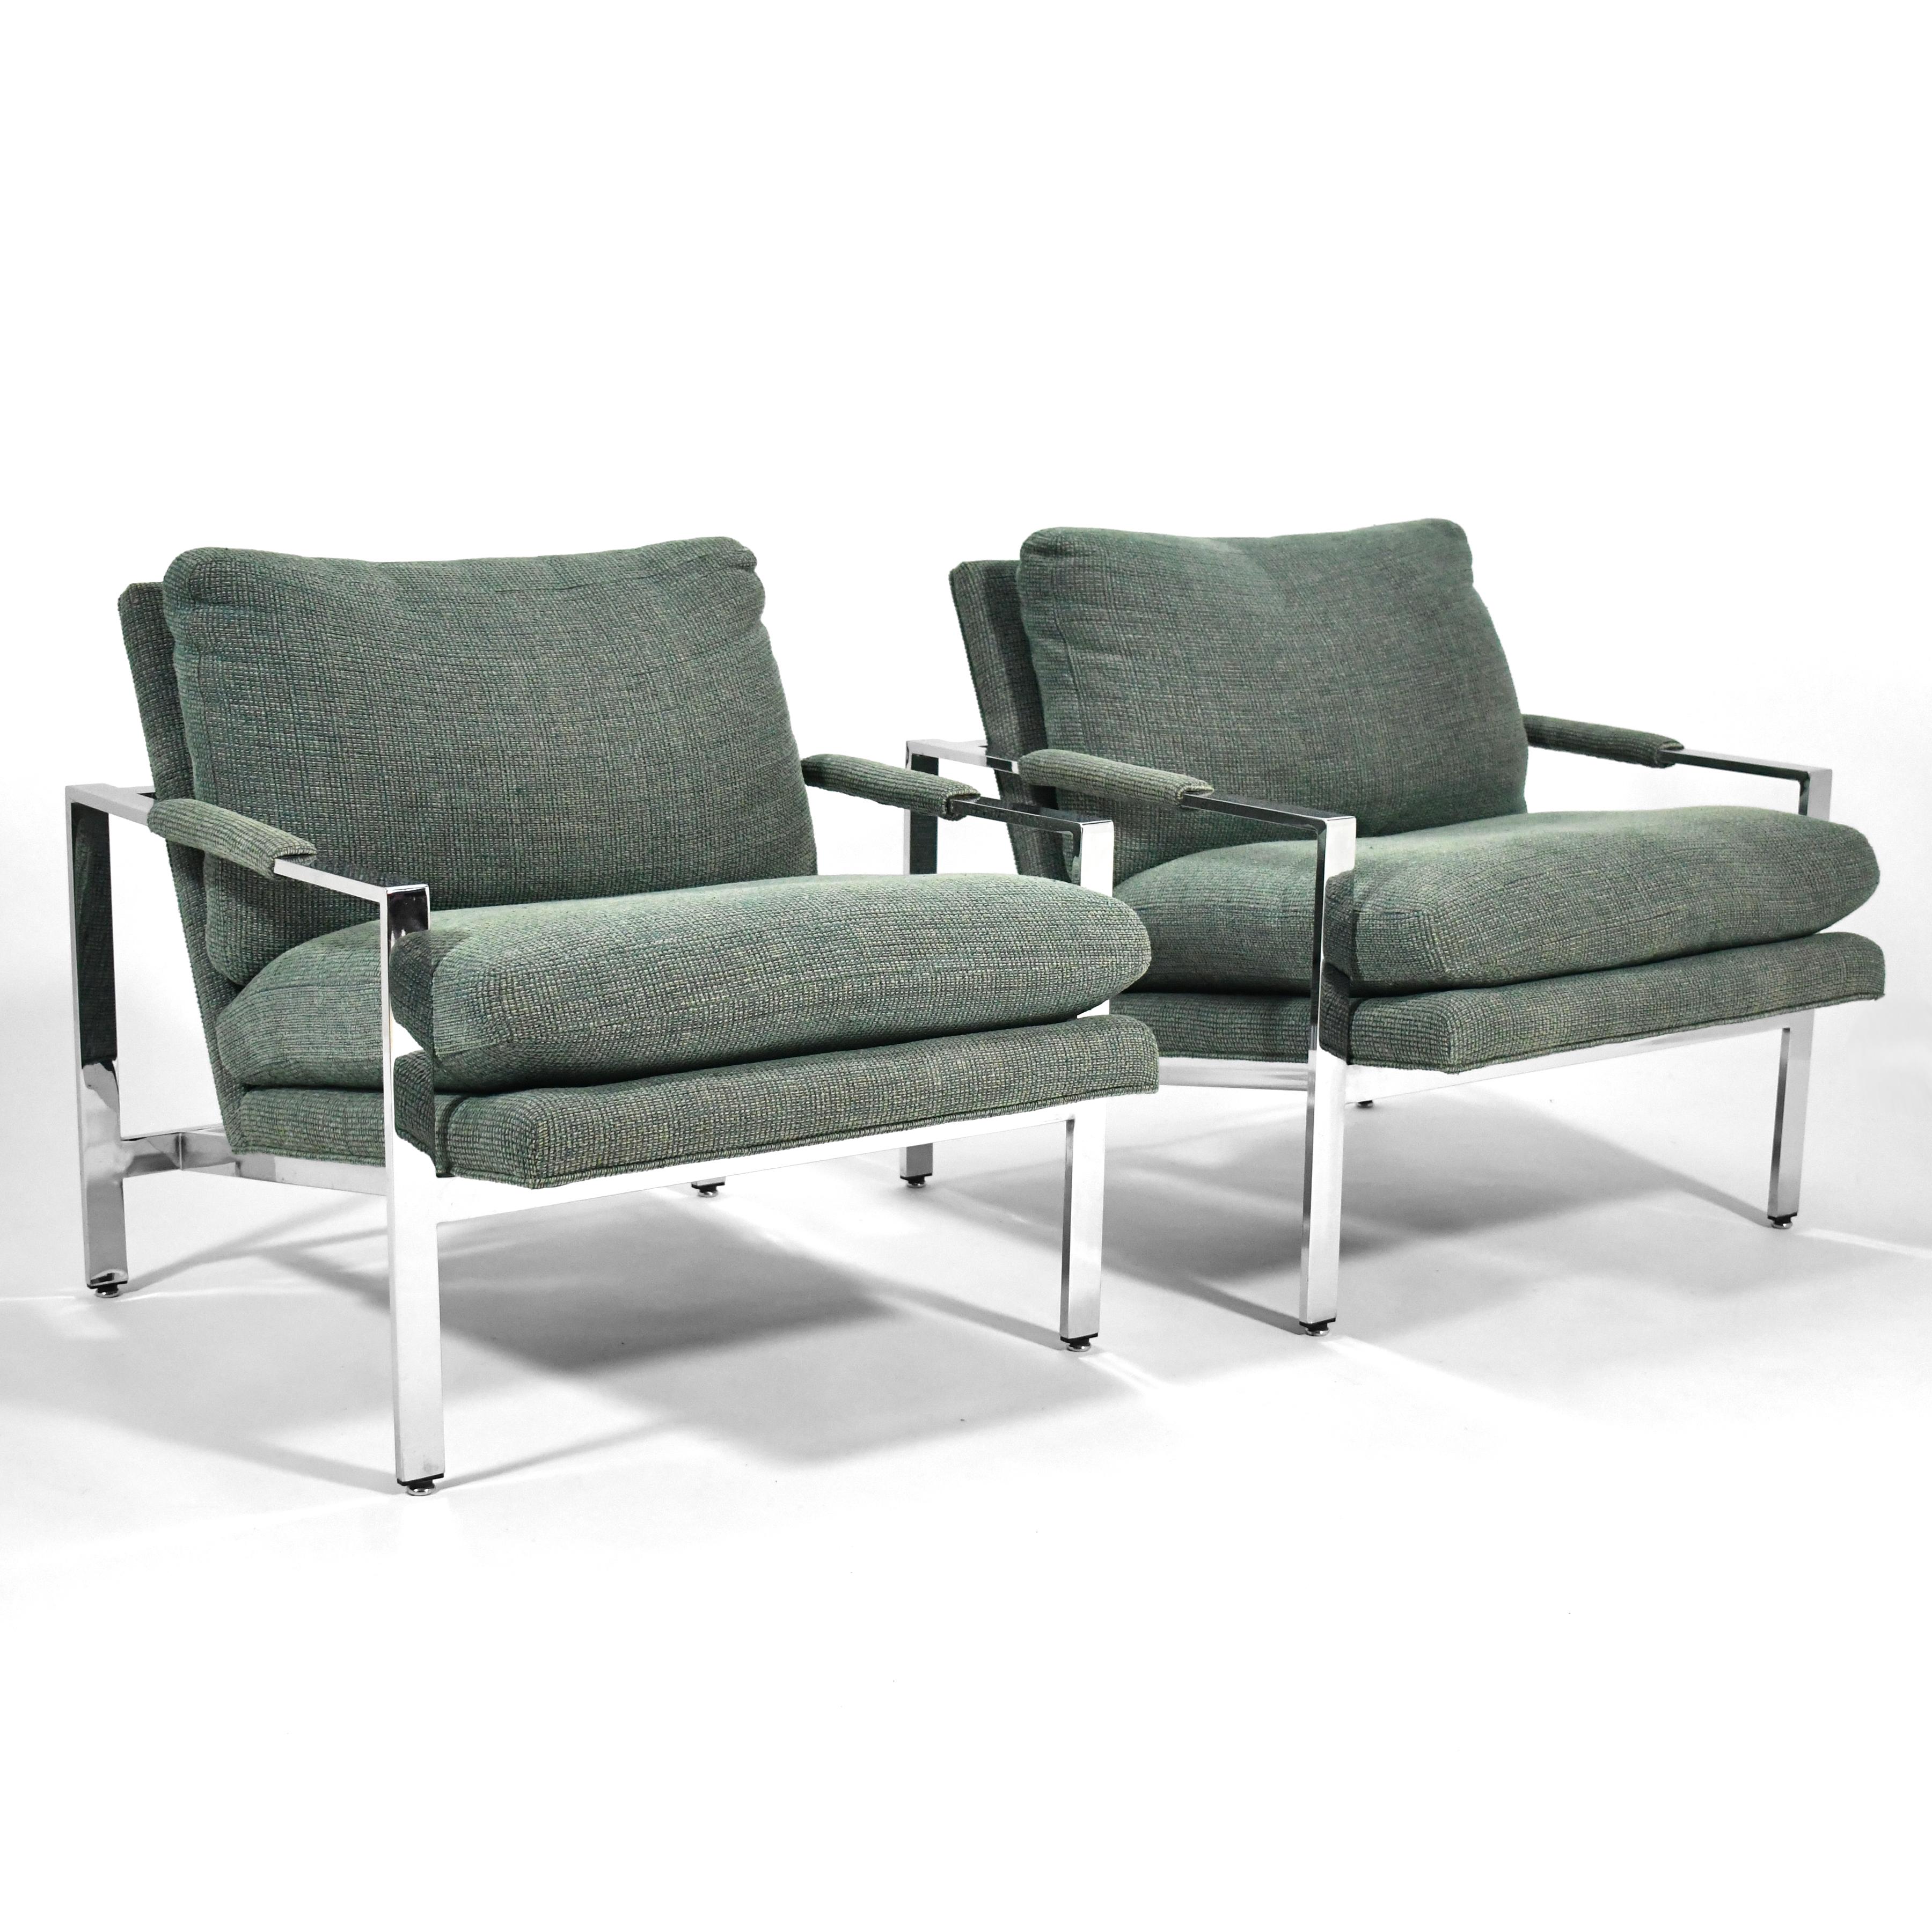 Baughman at his best, this clean-lined design features frames of chromed steel that support an upholstered seat. Deeply cushioned seats and upholstered arm rests add to the comfort.

